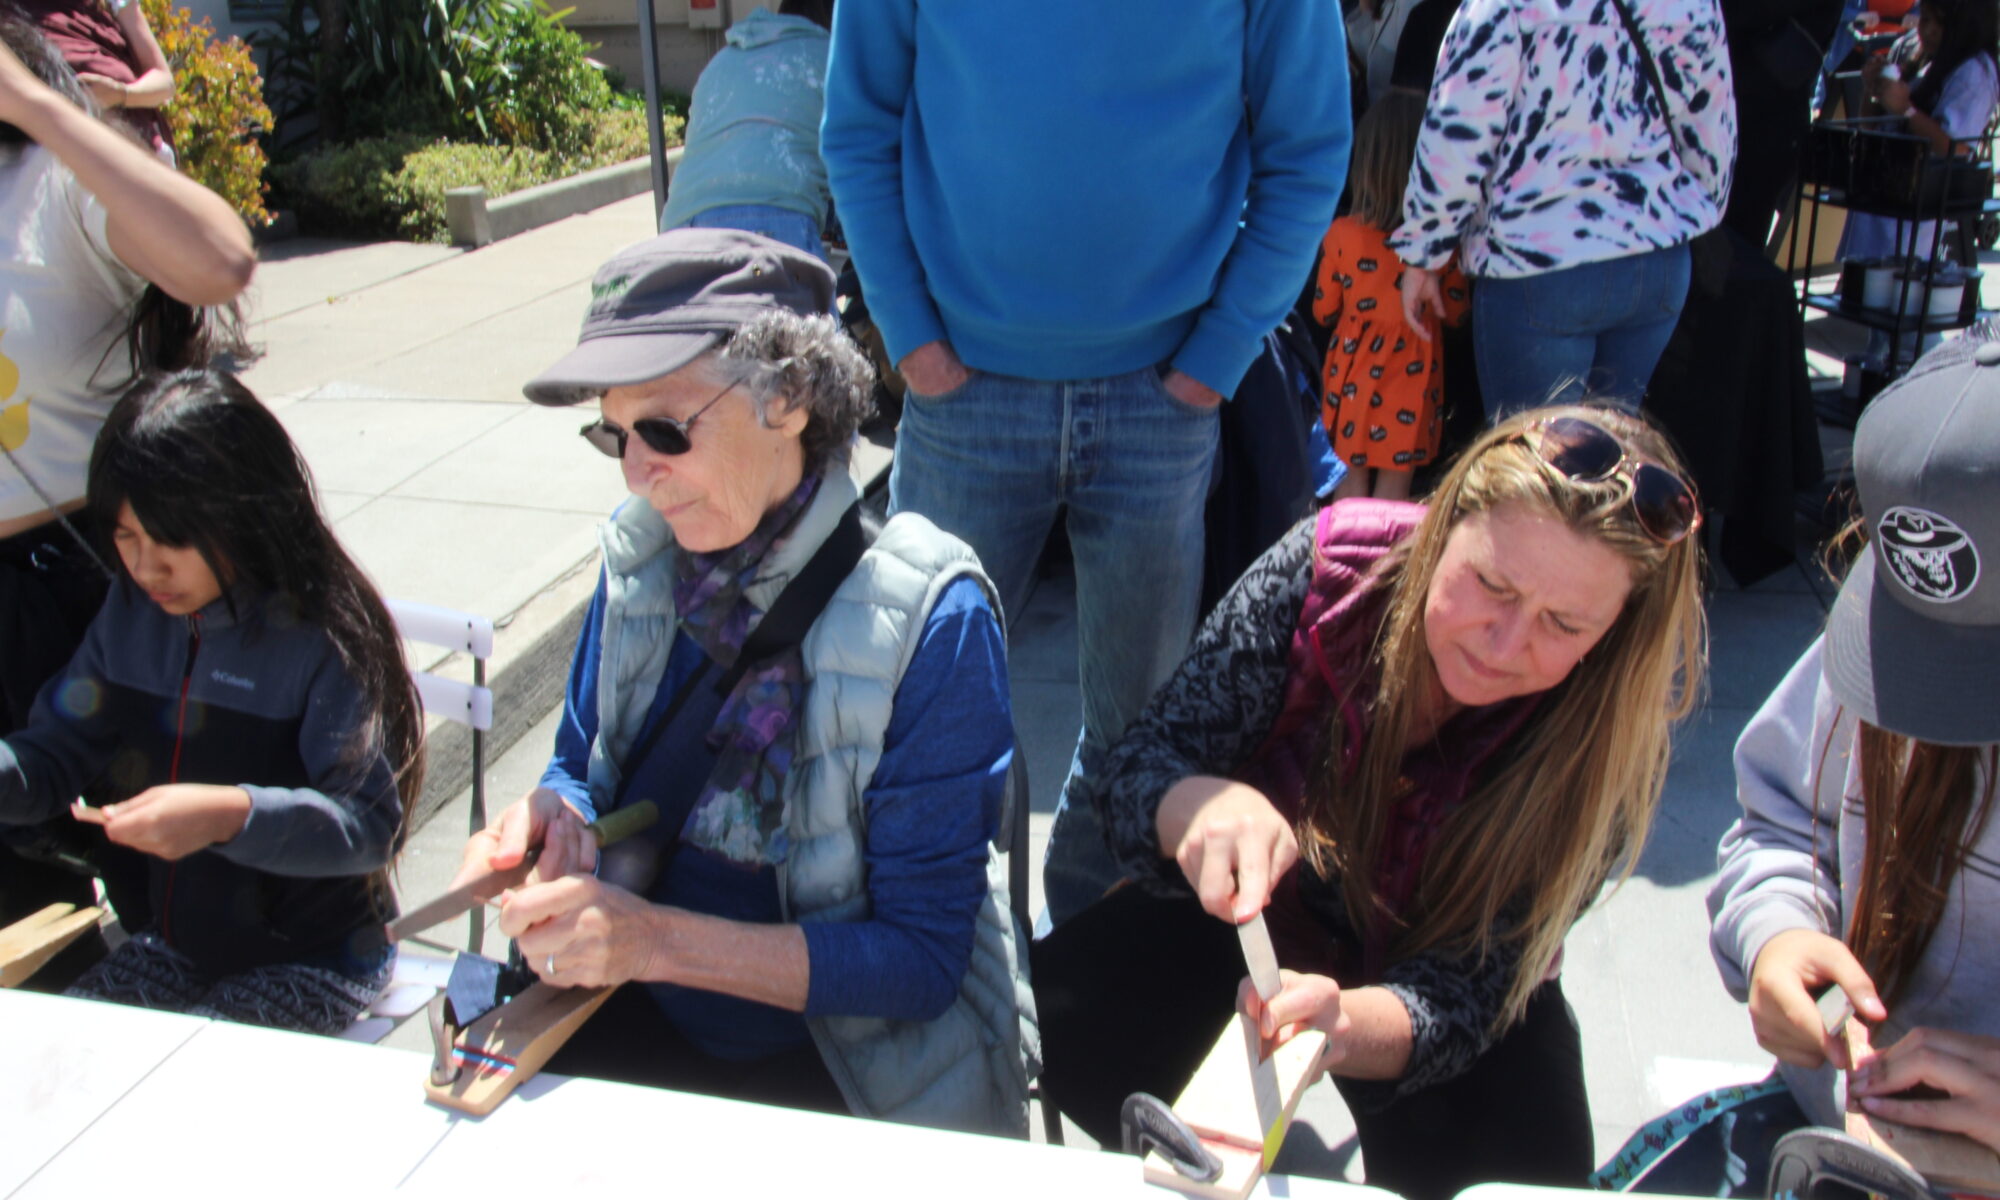 Another view of People of all ages confidently filing the ends of copper pieces to create a bracelet at the Make A Bracelet event as part of the Monterey Museum of Art Block Party 2023